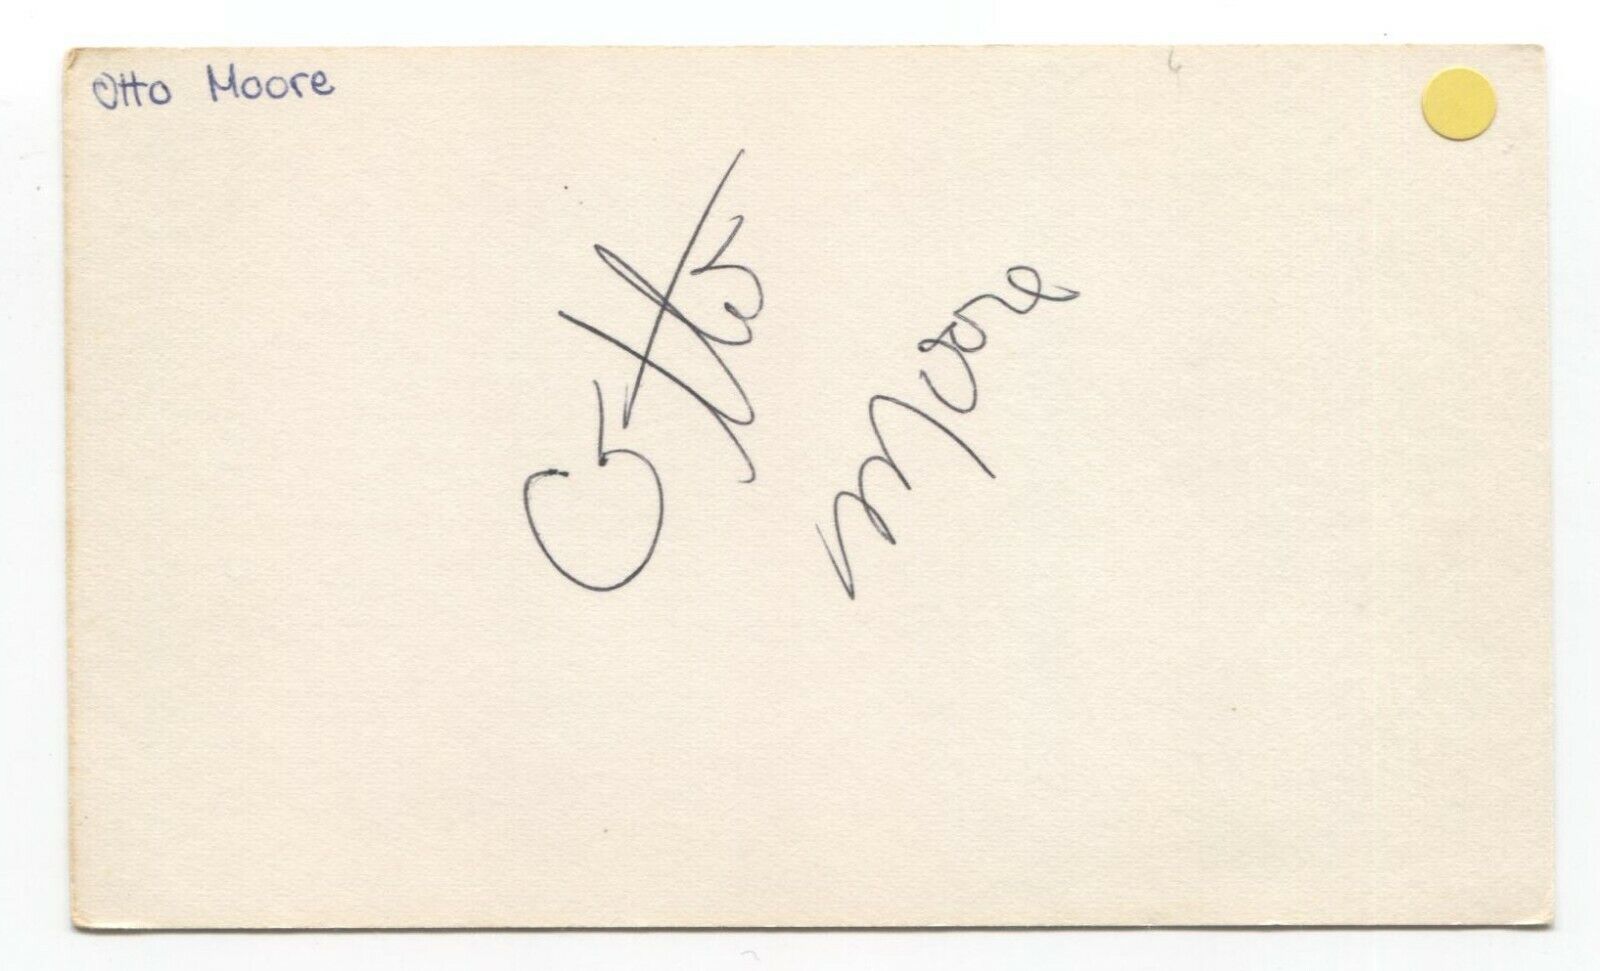 Otto Moore Signed 3x5 Index Card Autographed Signature Nba Basketball